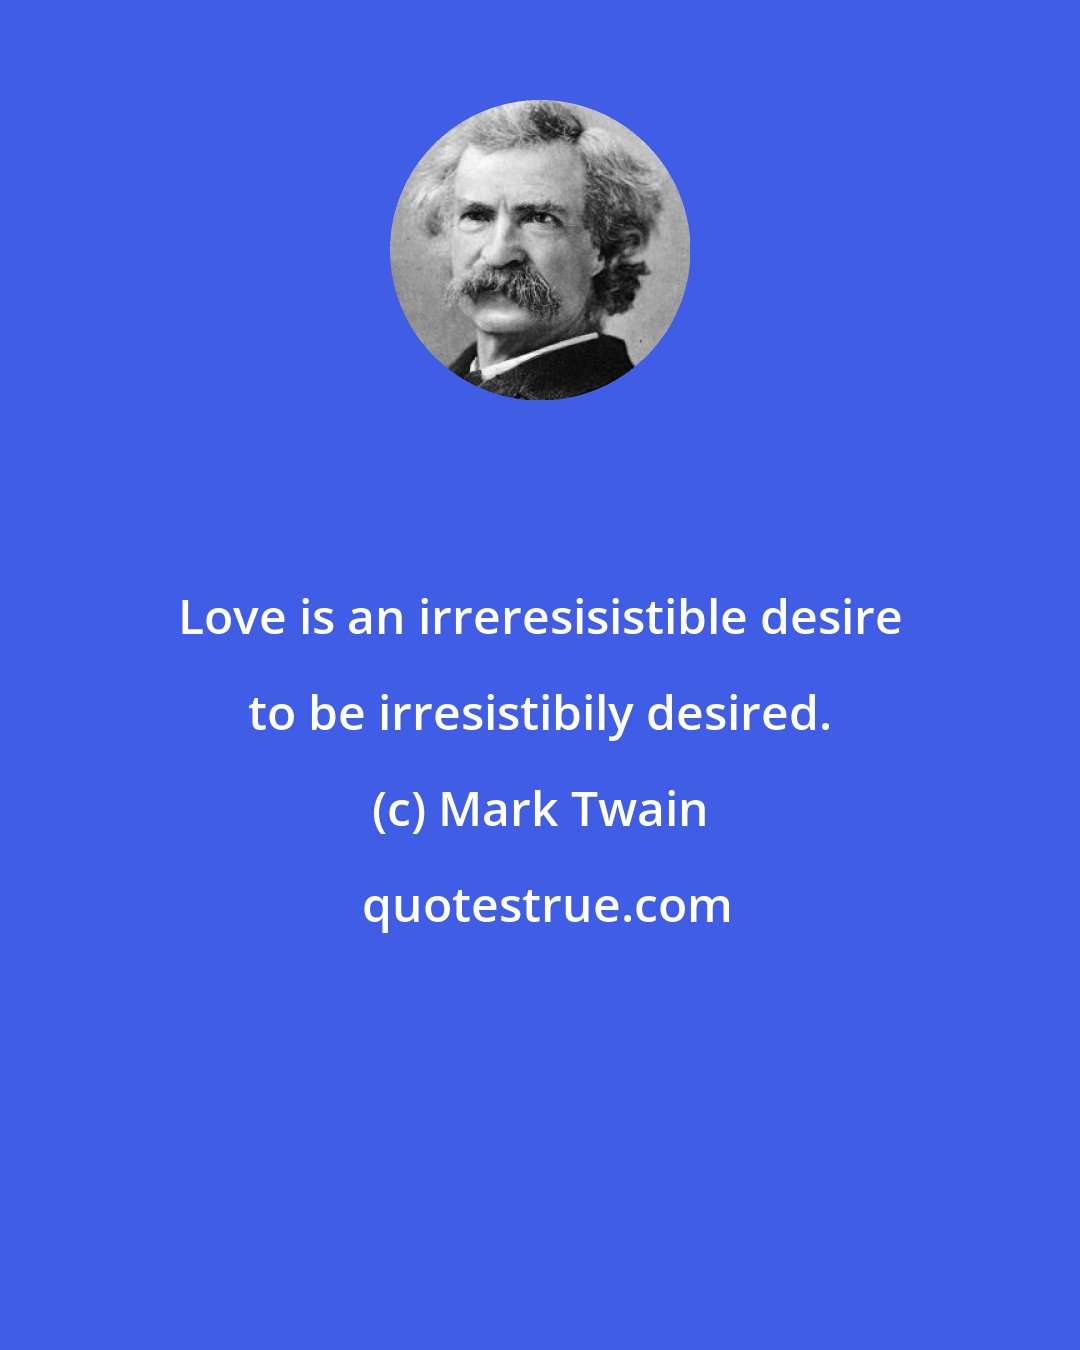 Mark Twain: Love is an irreresisistible desire to be irresistibily desired.